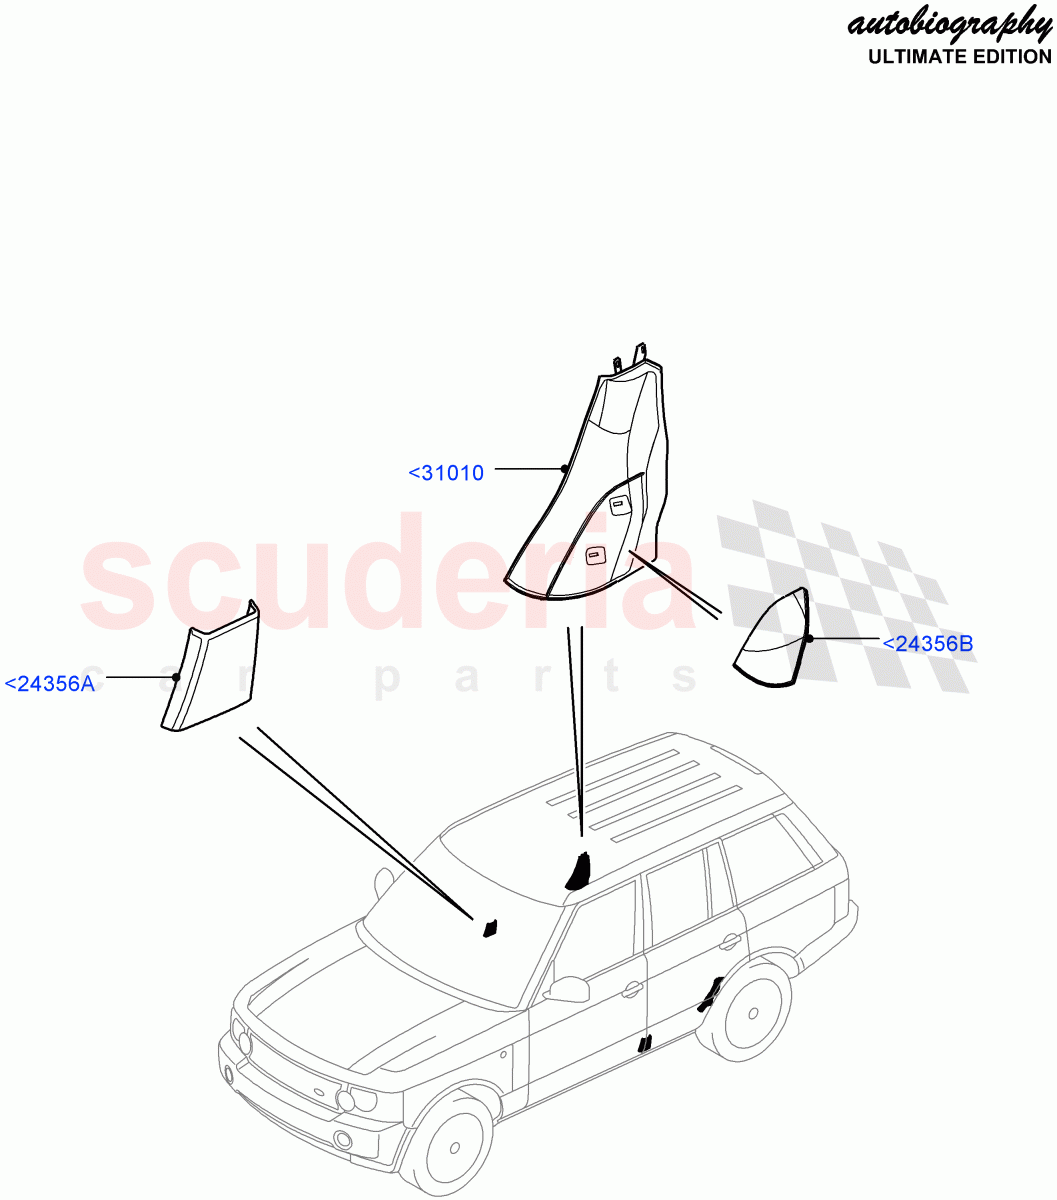 Side Trim(Front And Rear)(Autobiography Ultimate Edition)((V)FROMBA344356) of Land Rover Land Rover Range Rover (2010-2012) [5.0 OHC SGDI SC V8 Petrol]